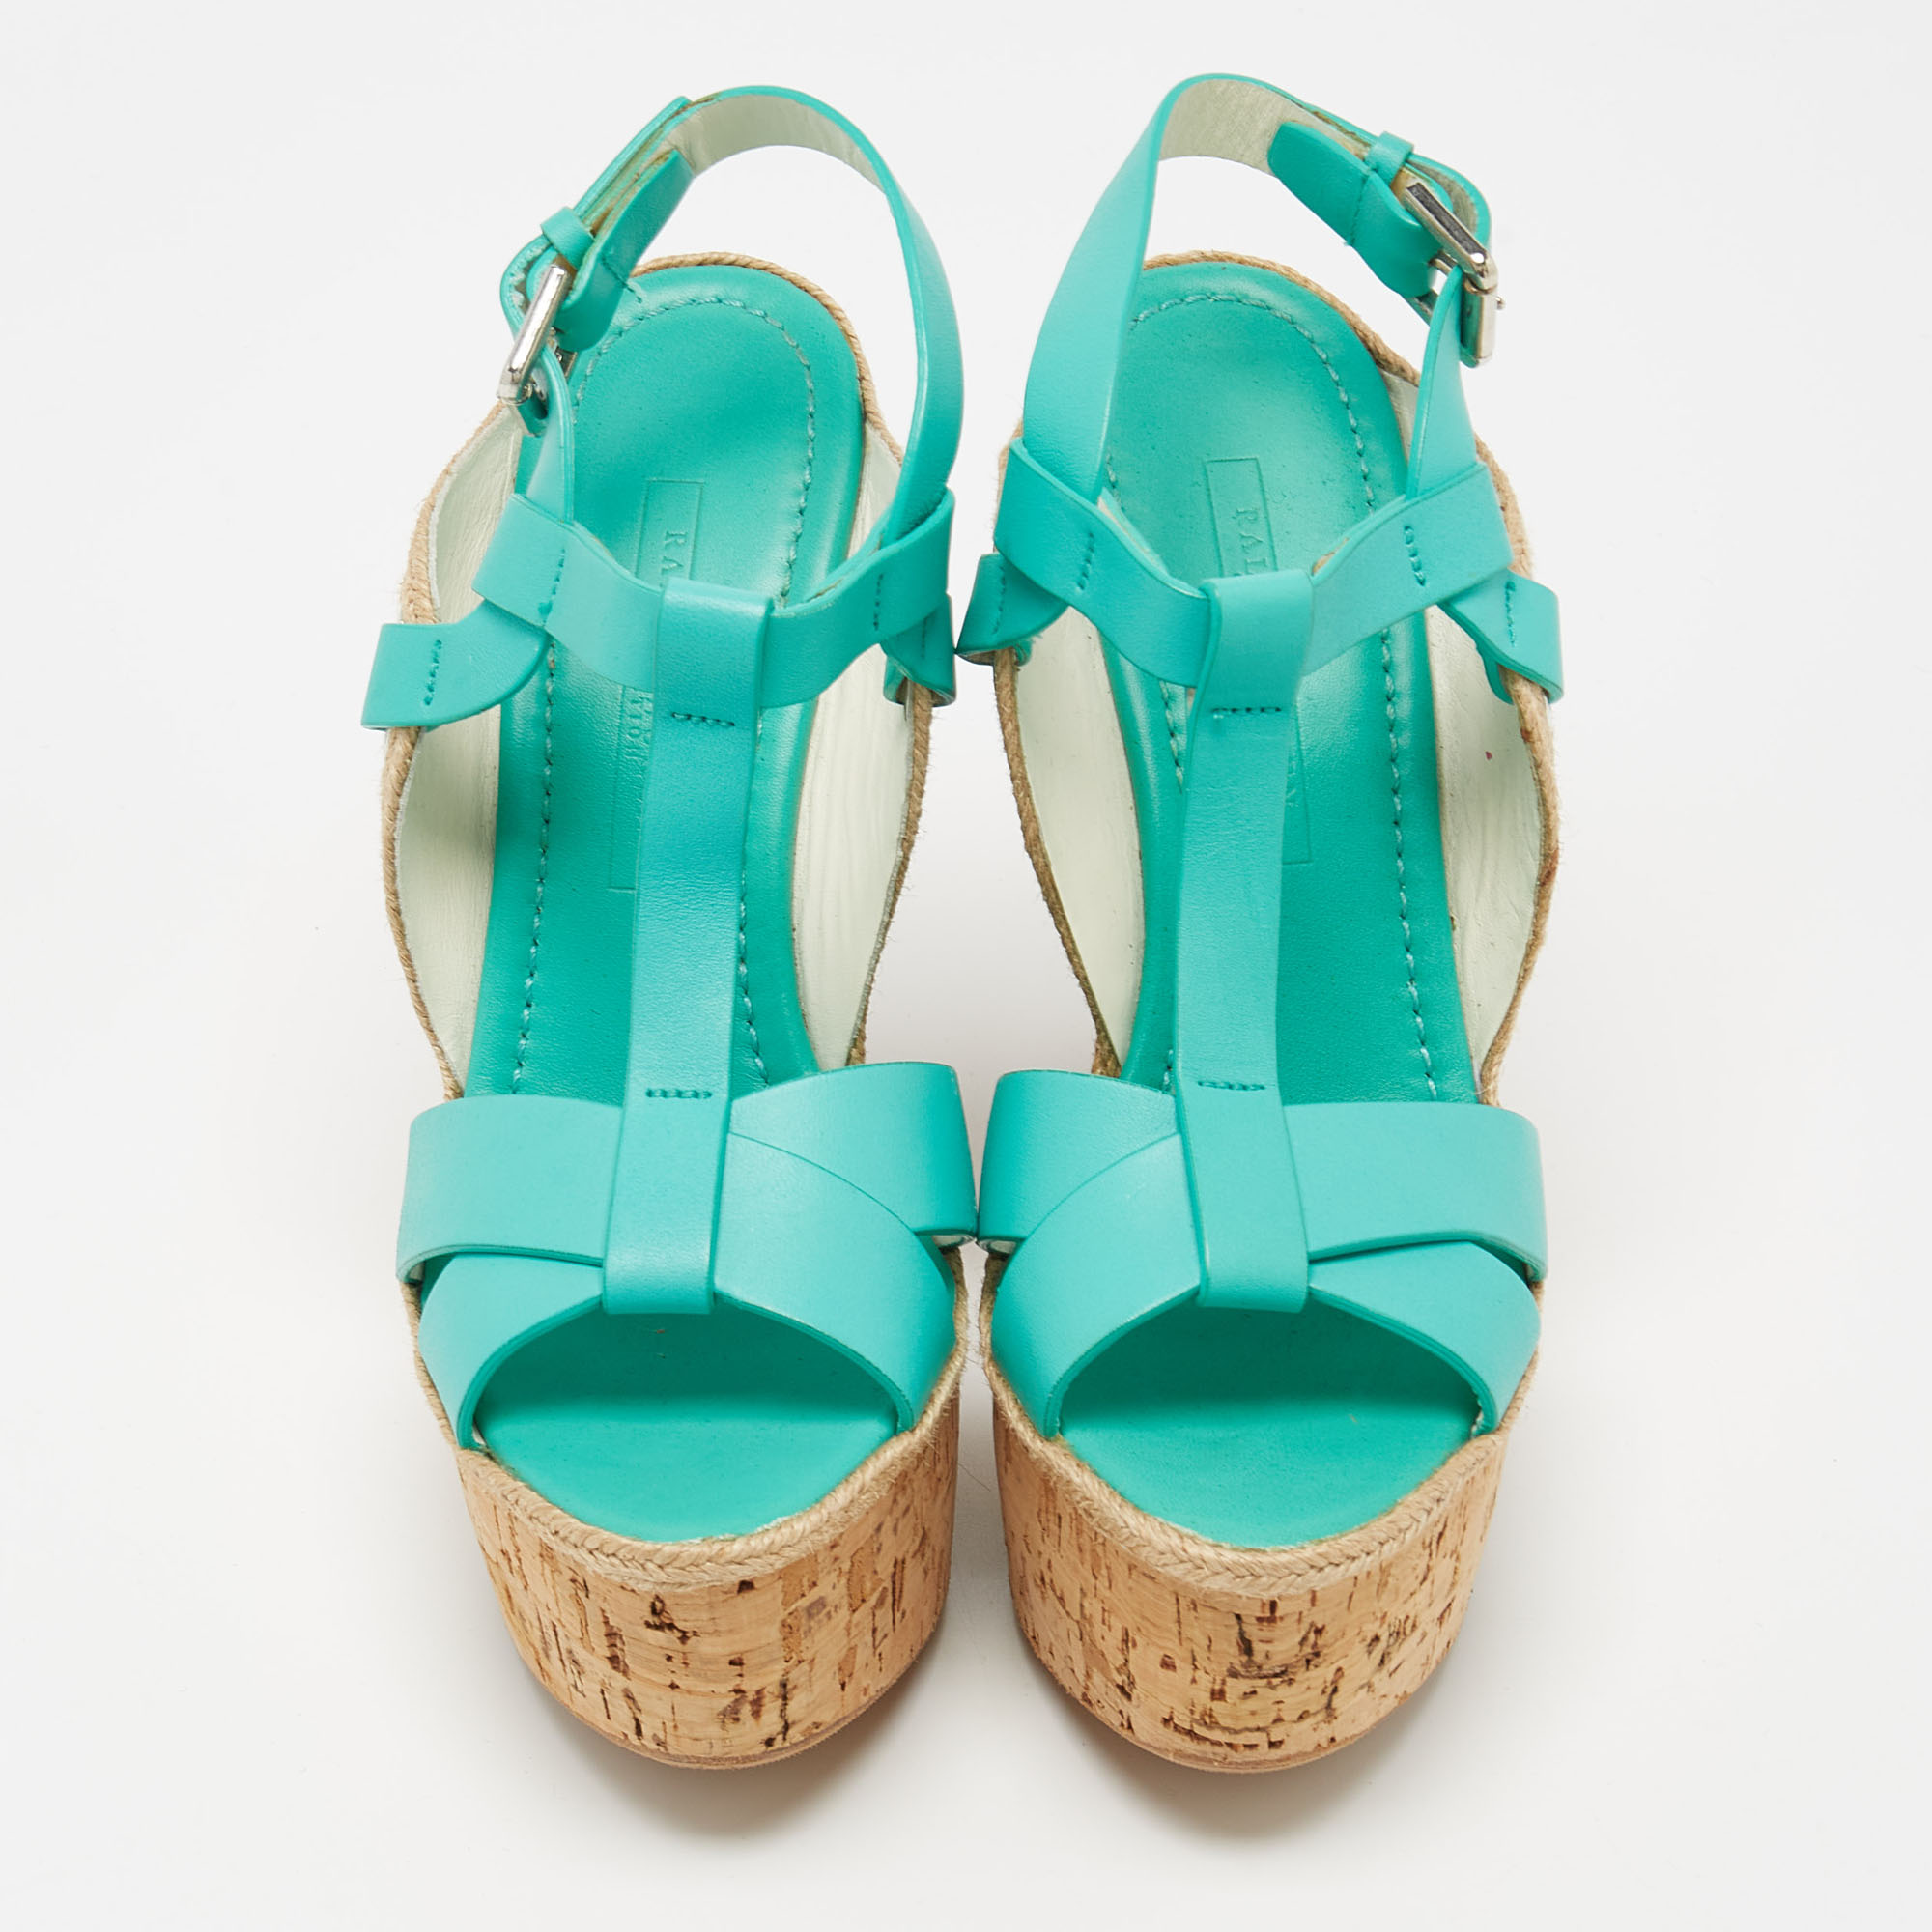 Ralph Lauren Turquoise Leather And Jute Cork Wedge Ankle Strap Sandals Size 37.5